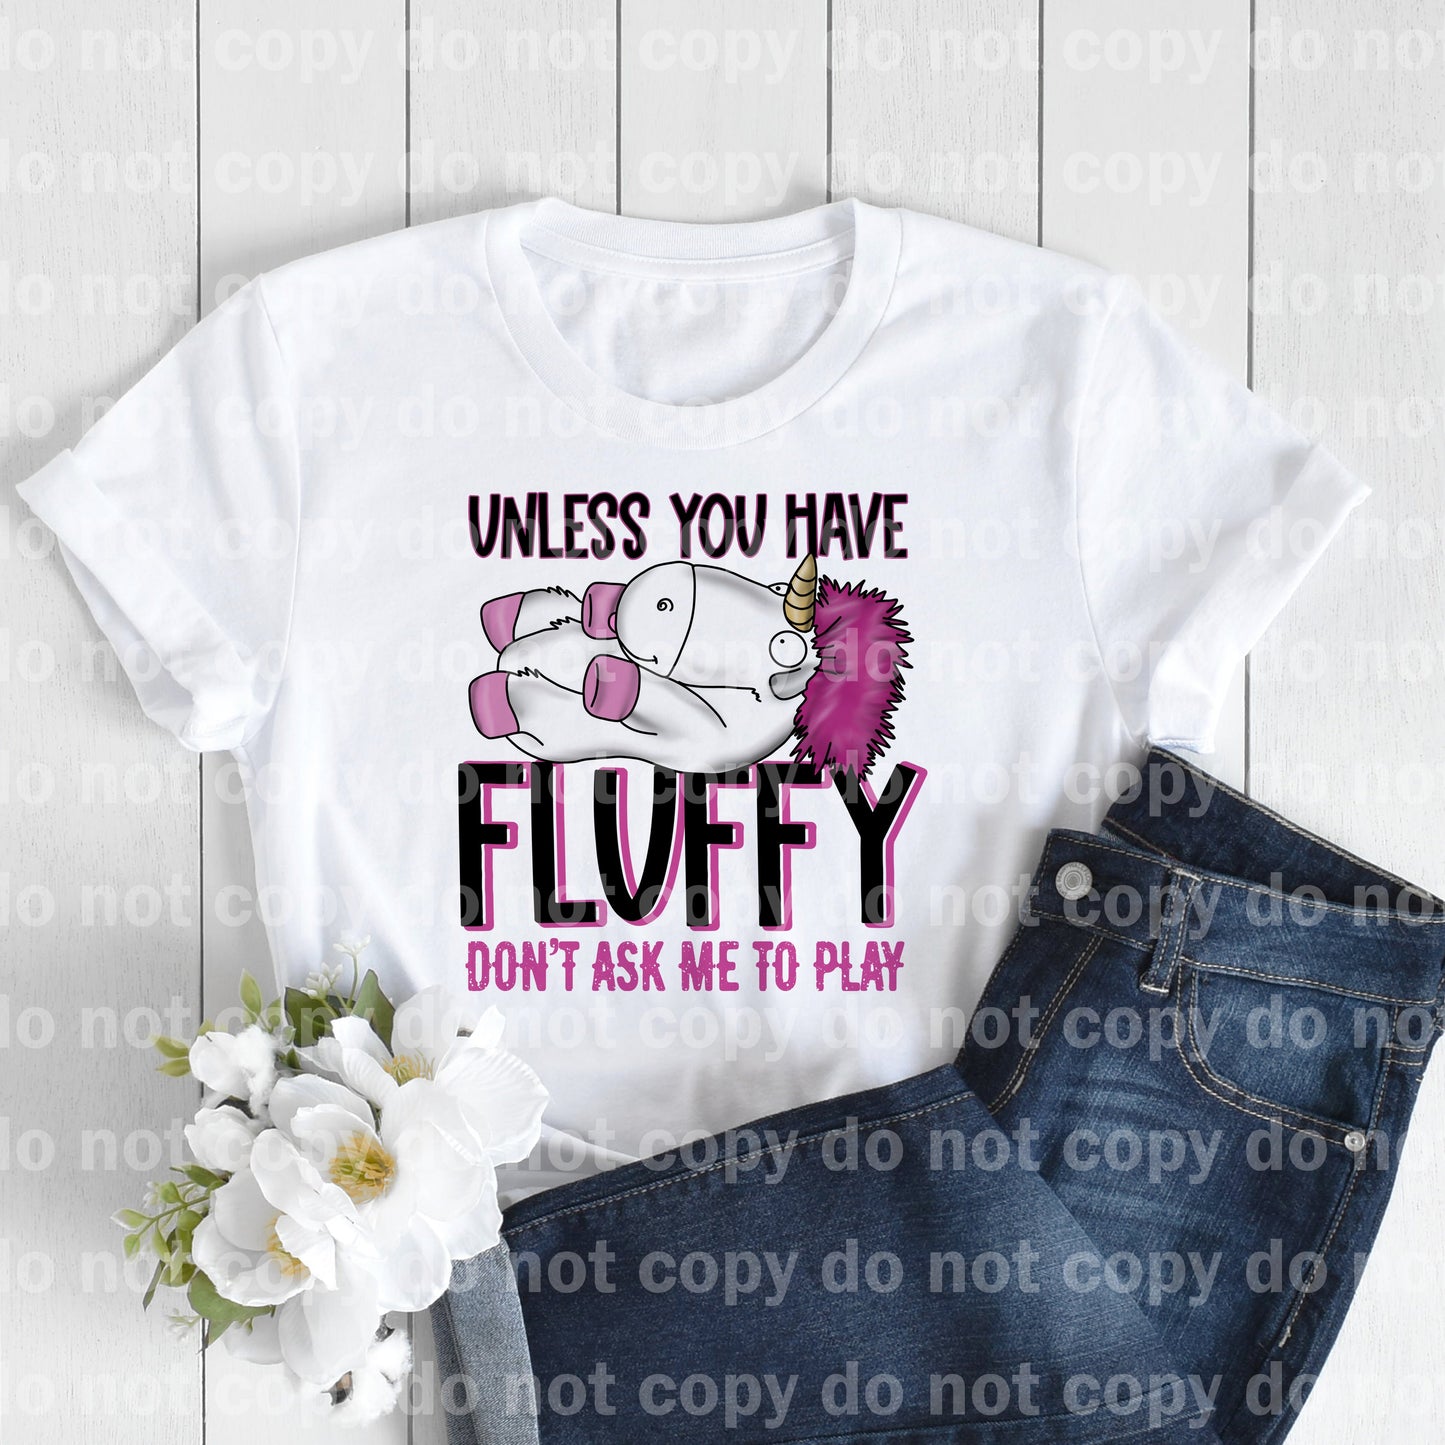 Unless You Have Fluffy Don't Ask Me To Play Unicorn Dream Print or Sublimation Print